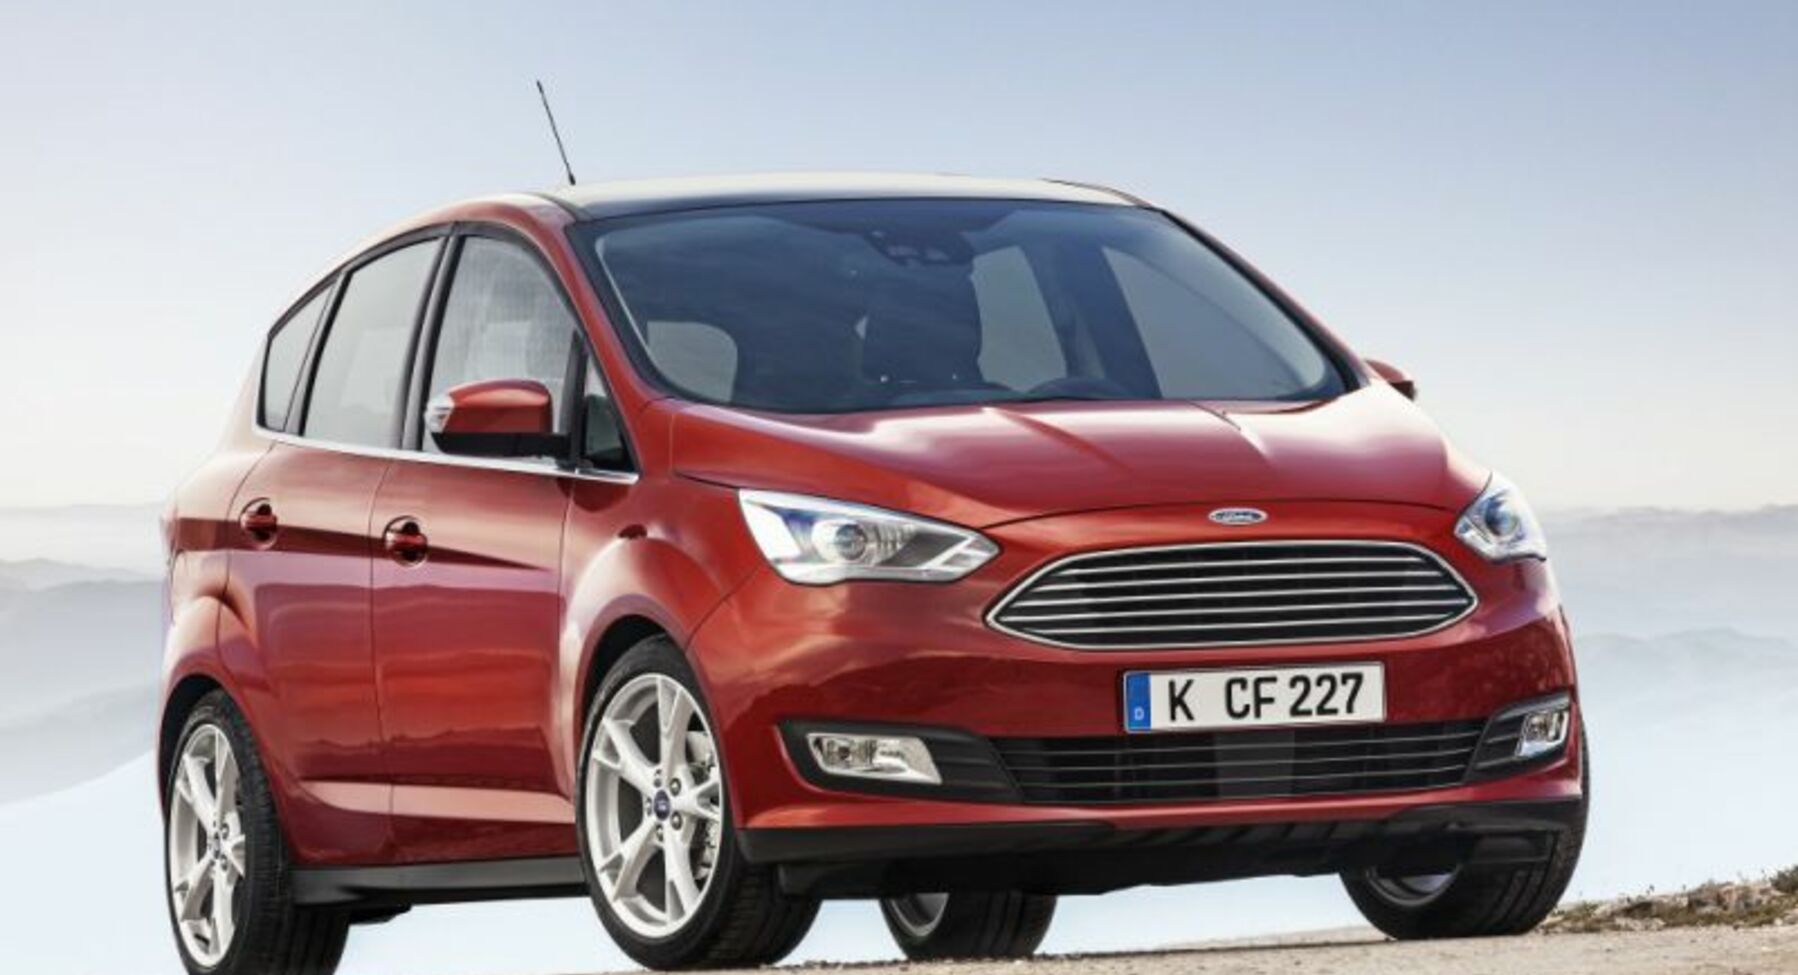 Ford C-MAX II (facelift 2015) 1.5 ECOnetic (105 Hp) S&S 2015, 2016, 2017, 2018, 2019, 2020, 2021 